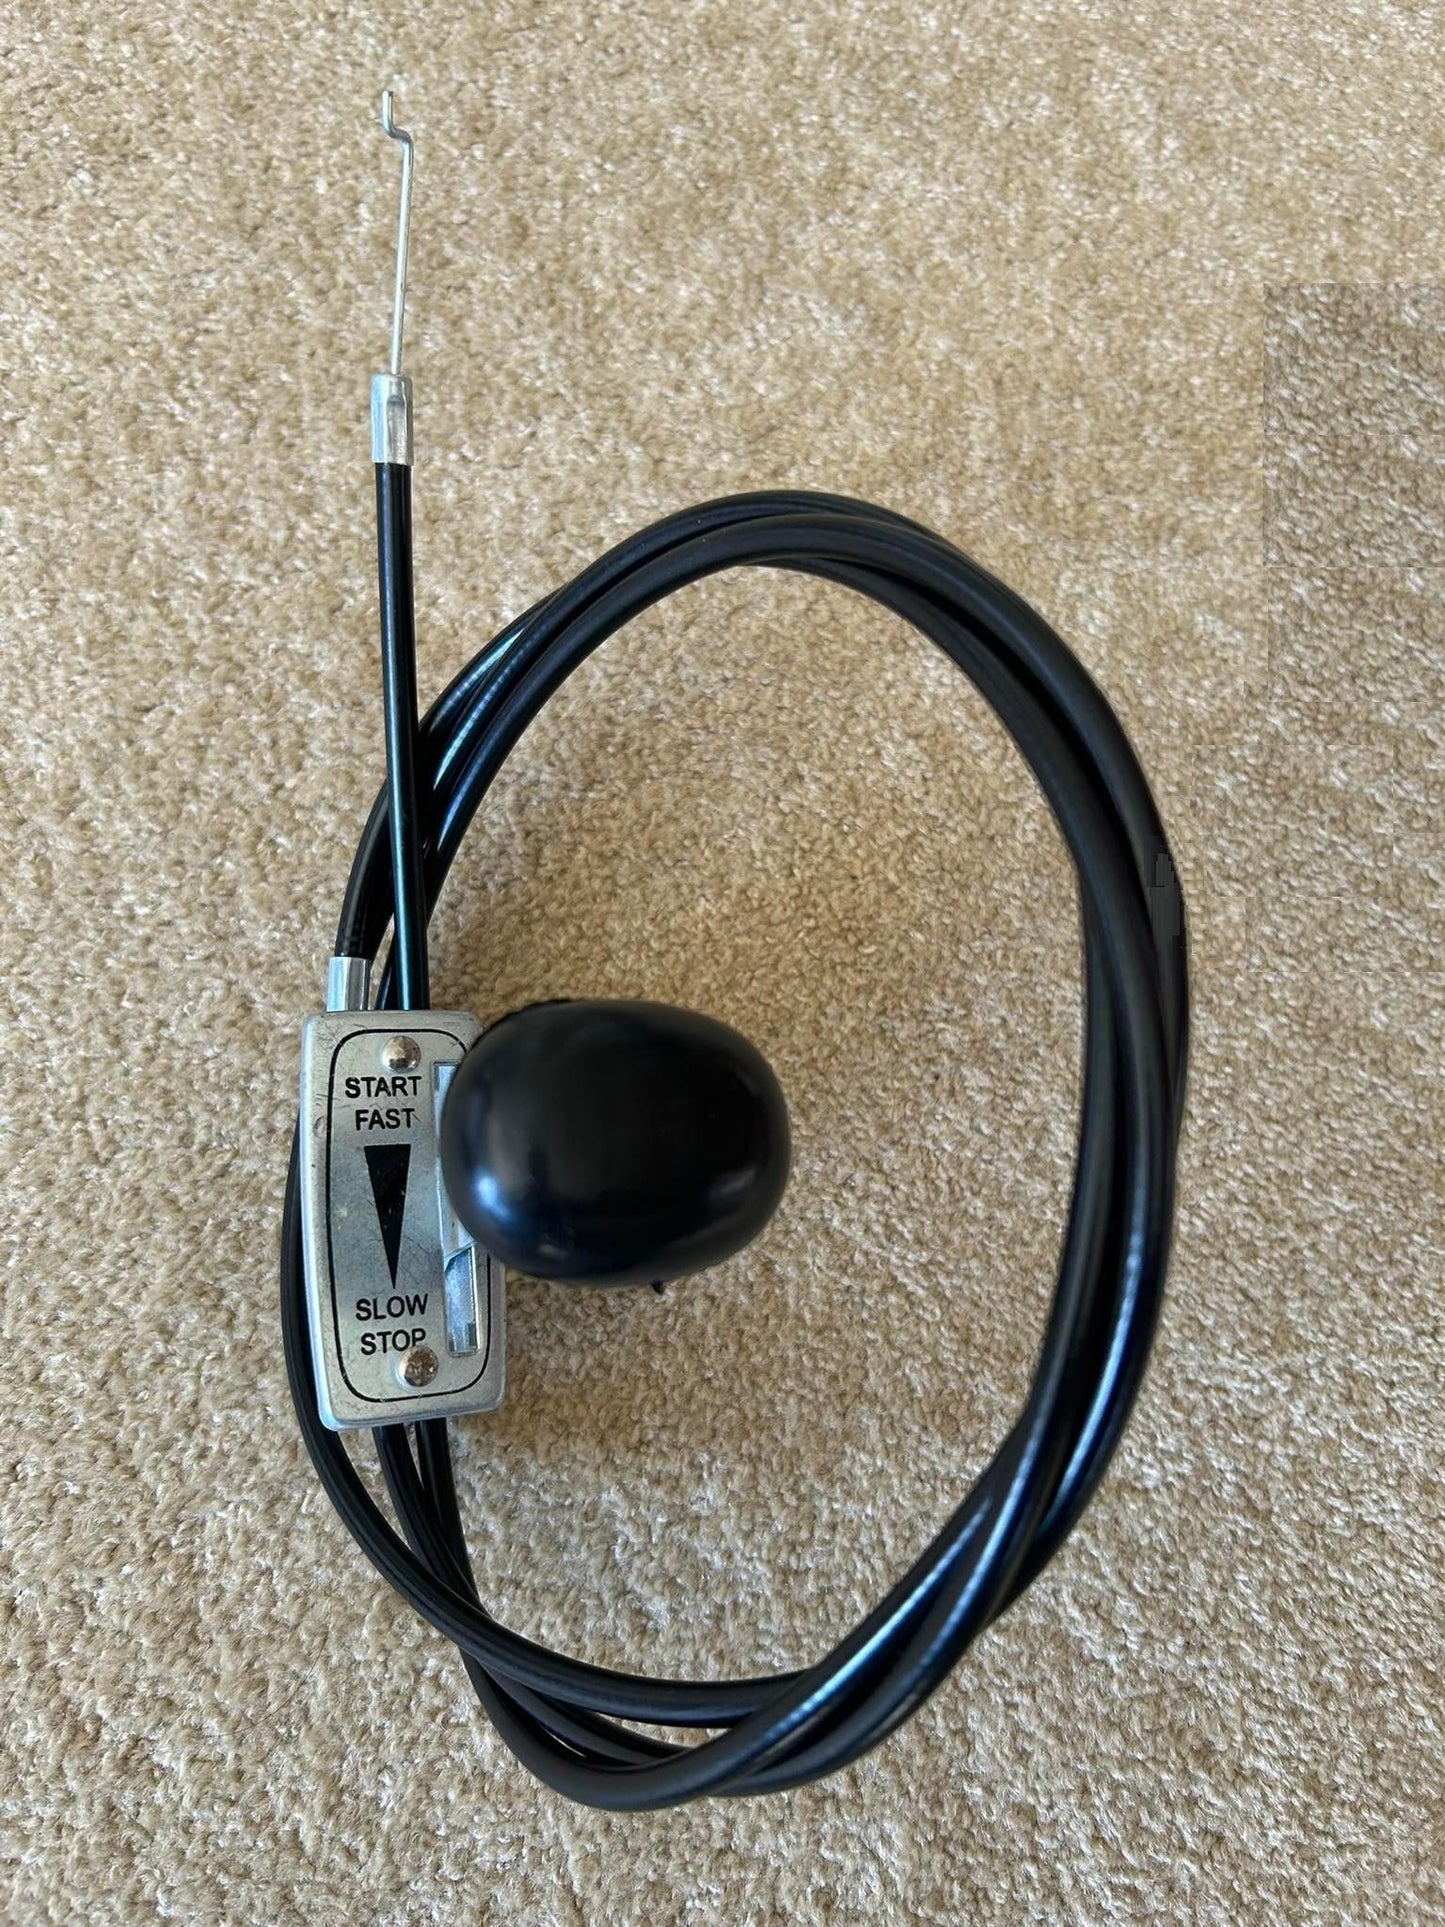 Universal Lawn Mower Throttle Control with 1.8m Cable